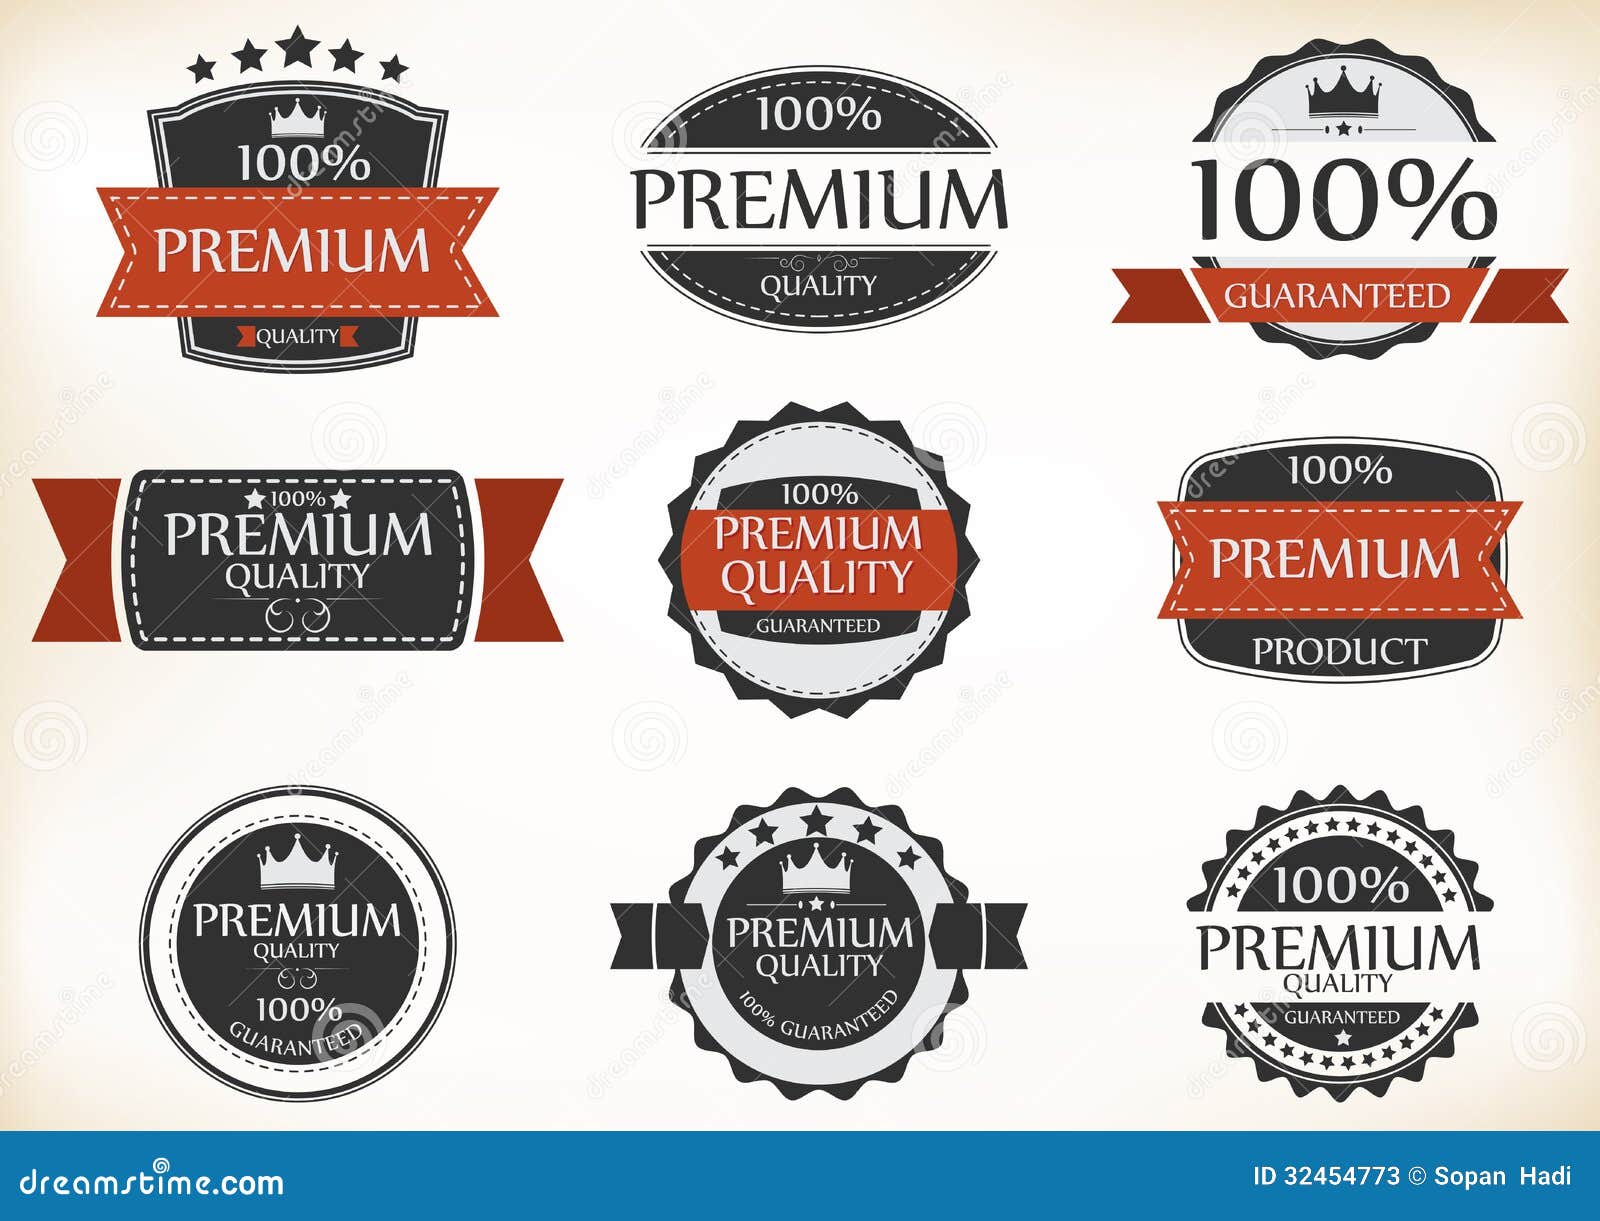 Premium Quality and Guarantee Labels with Retro Vintage Style Stock ...